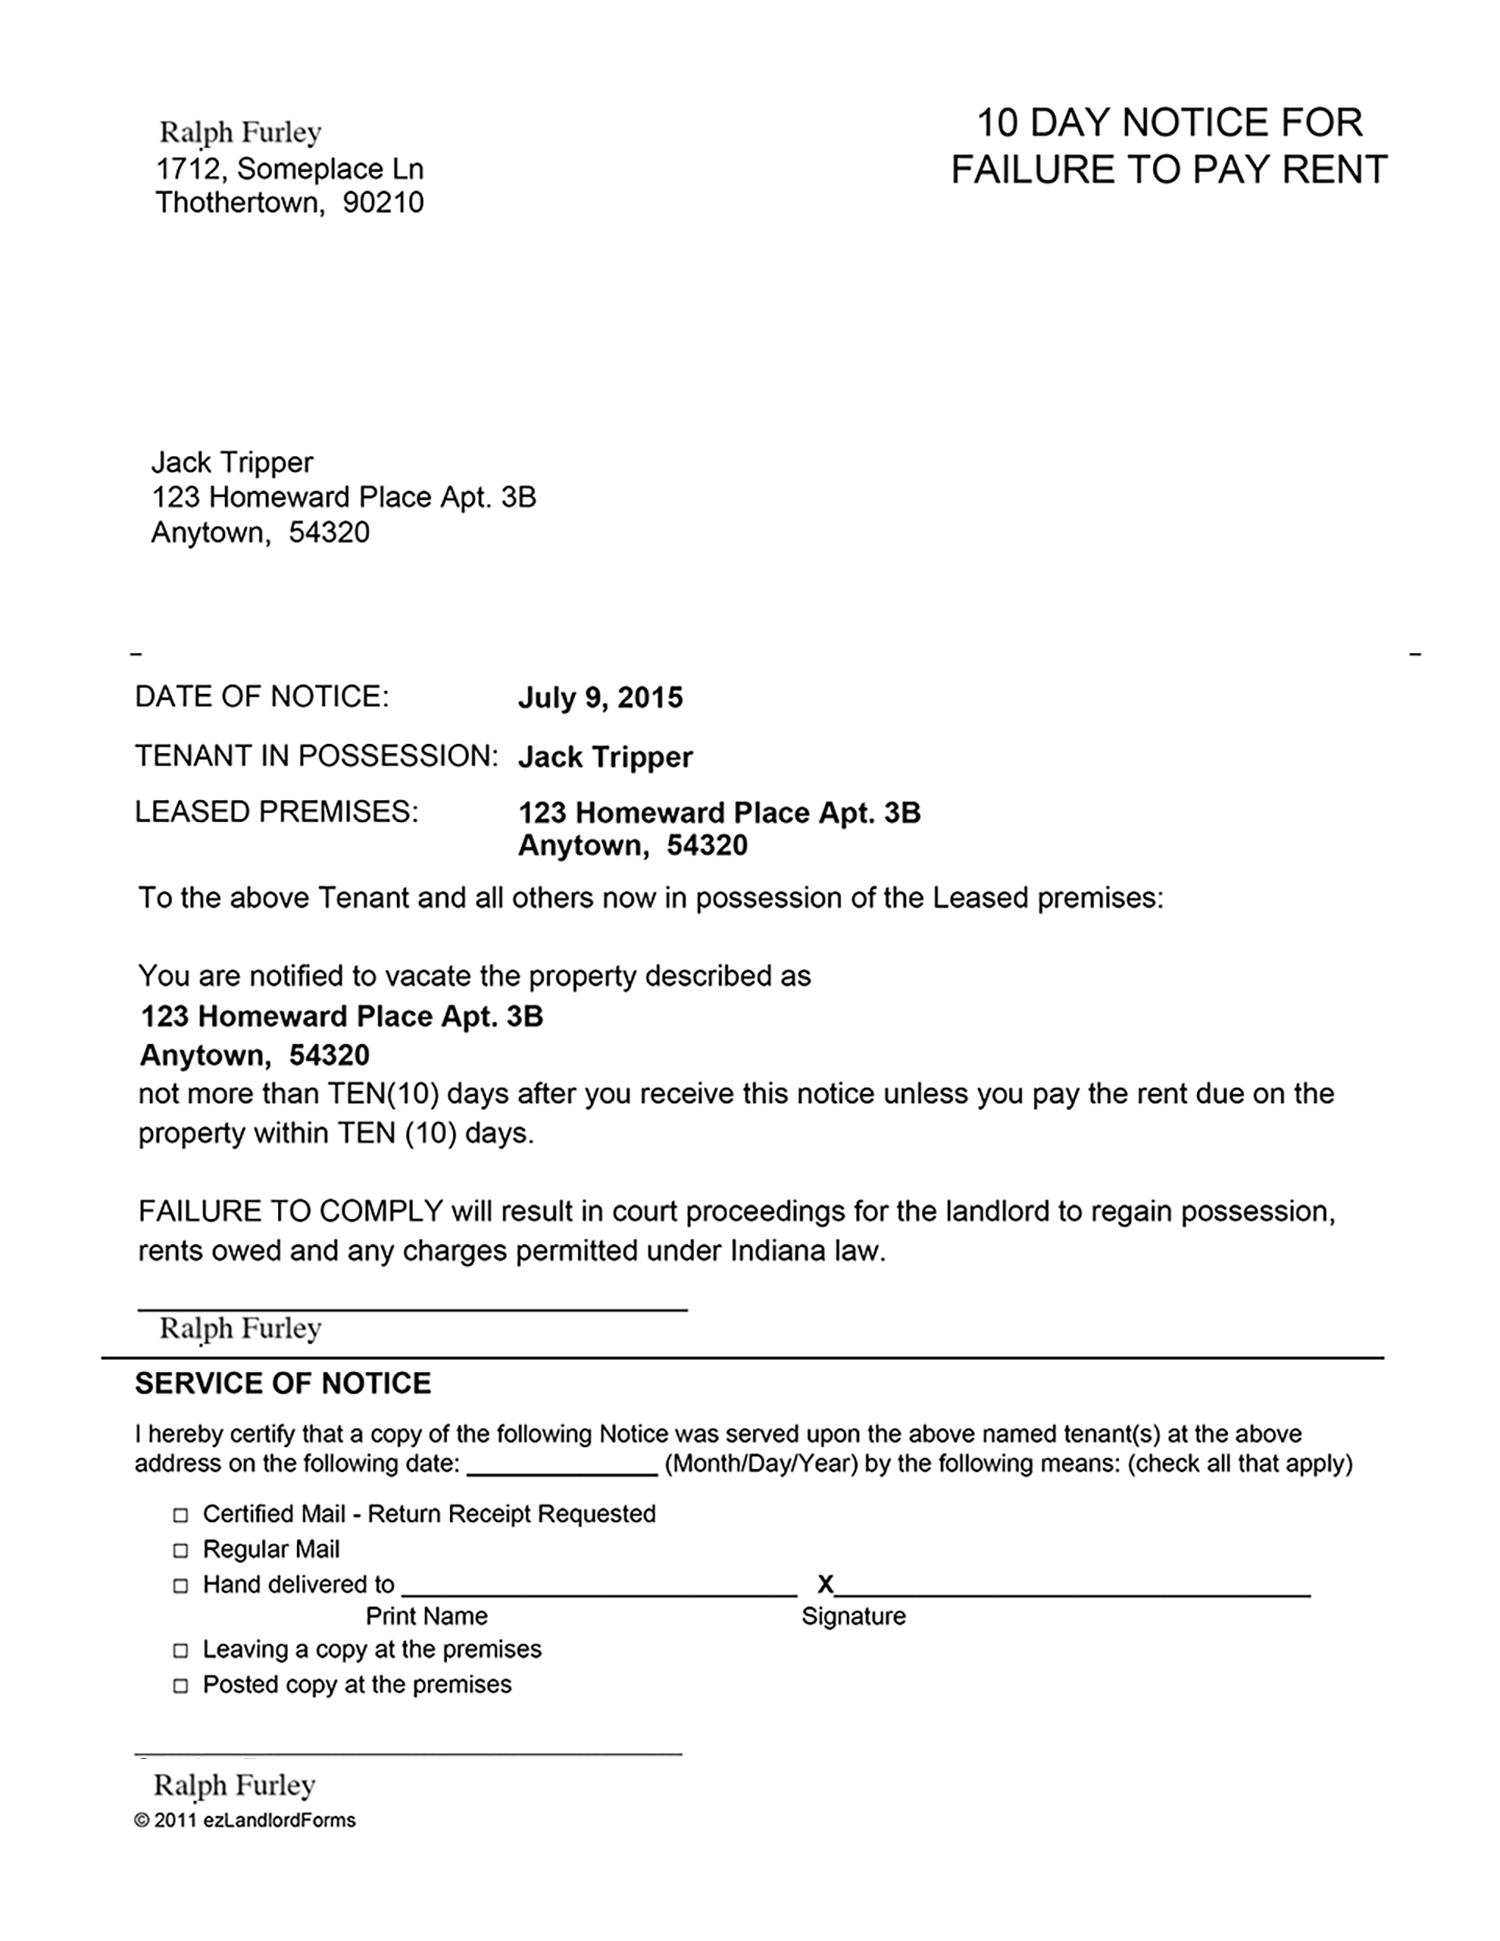 indiana 10 day notice for failure to pay rent ezlandlordforms past due invoice sample legal action 10 days sample